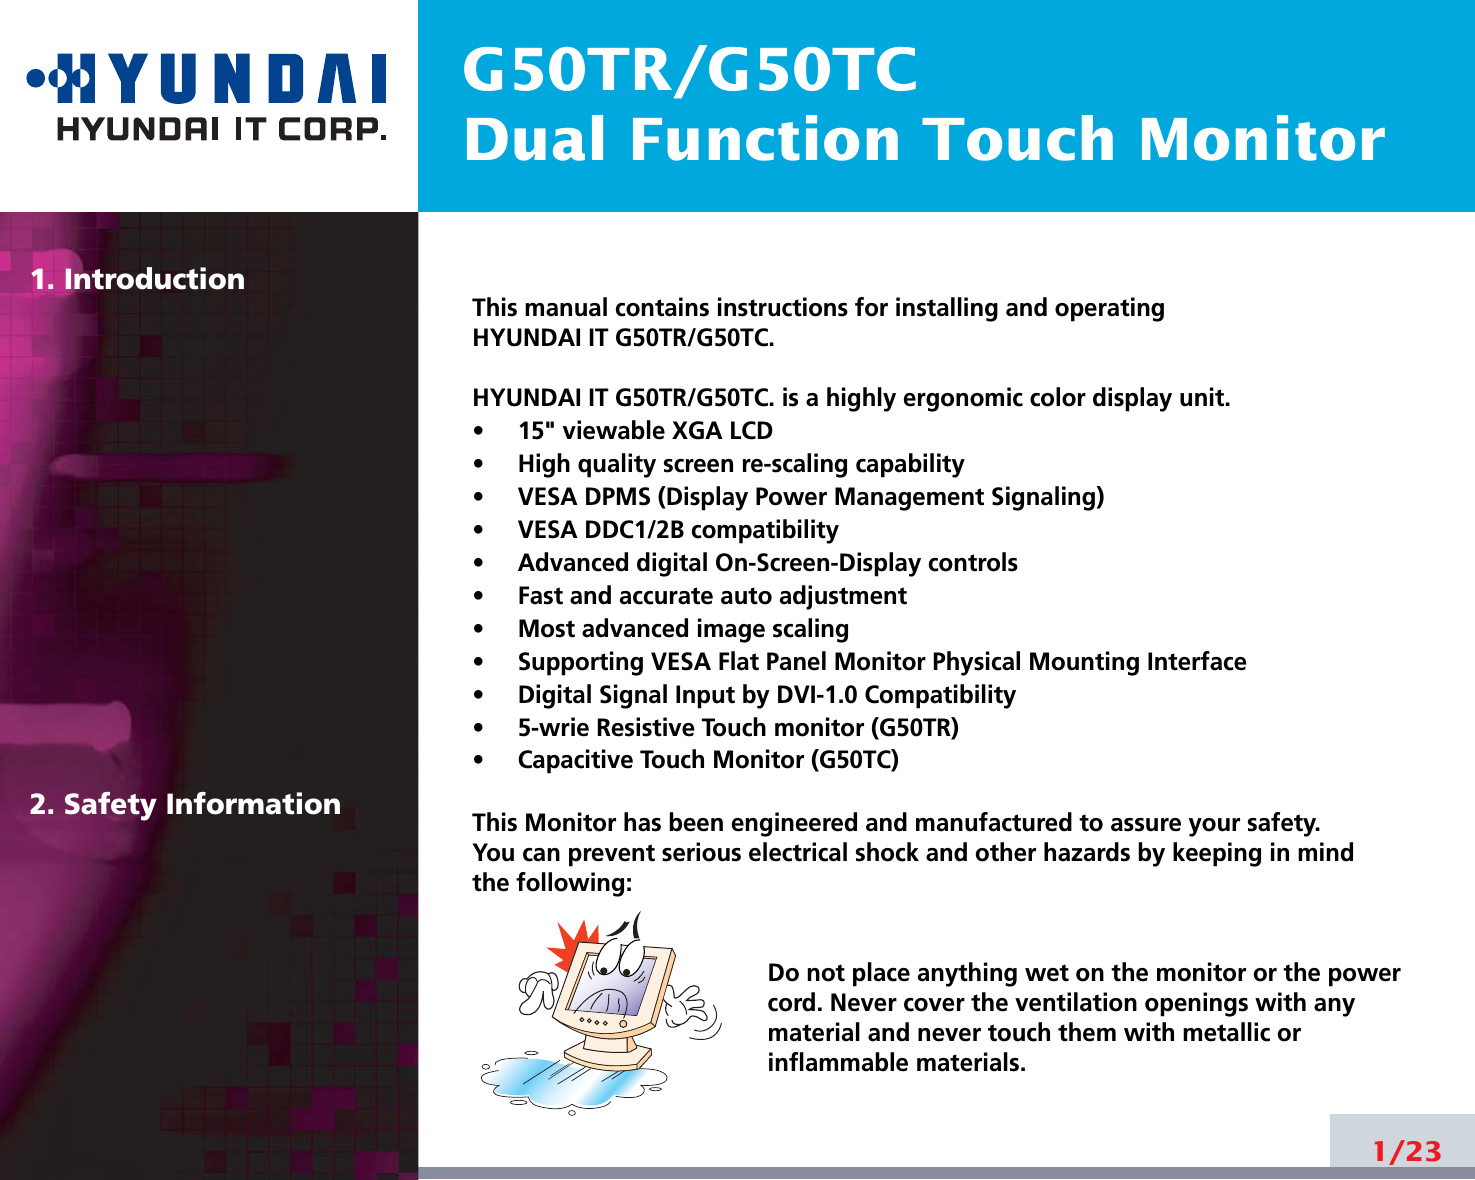 G50TR/G50TCDual Function Touch Monitor1. Introduction2. Safety Information1/23This manual contains instructions for installing and operatingHYUNDAI IT G50TR/G50TC.HYUNDAI IT G50TR/G50TC. is a highly ergonomic color display unit.•     15&quot; viewable XGA LCD•     High quality screen re-scaling capability•     VESA DPMS (Display Power Management Signaling)•     VESA DDC1/2B compatibility•     Advanced digital On-Screen-Display controls•     Fast and accurate auto adjustment  •     Most advanced image scaling•     Supporting VESA Flat Panel Monitor Physical Mounting Interface•     Digital Signal Input by DVI-1.0 Compatibility •     5-wrie Resistive Touch monitor (G50TR)•     Capacitive Touch Monitor (G50TC)This Monitor has been engineered and manufactured to assure your safety. You can prevent serious electrical shock and other hazards by keeping in mind the following:Do not place anything wet on the monitor or the powercord. Never cover the ventilation openings with anymaterial and never touch them with metallic or inflammable materials.